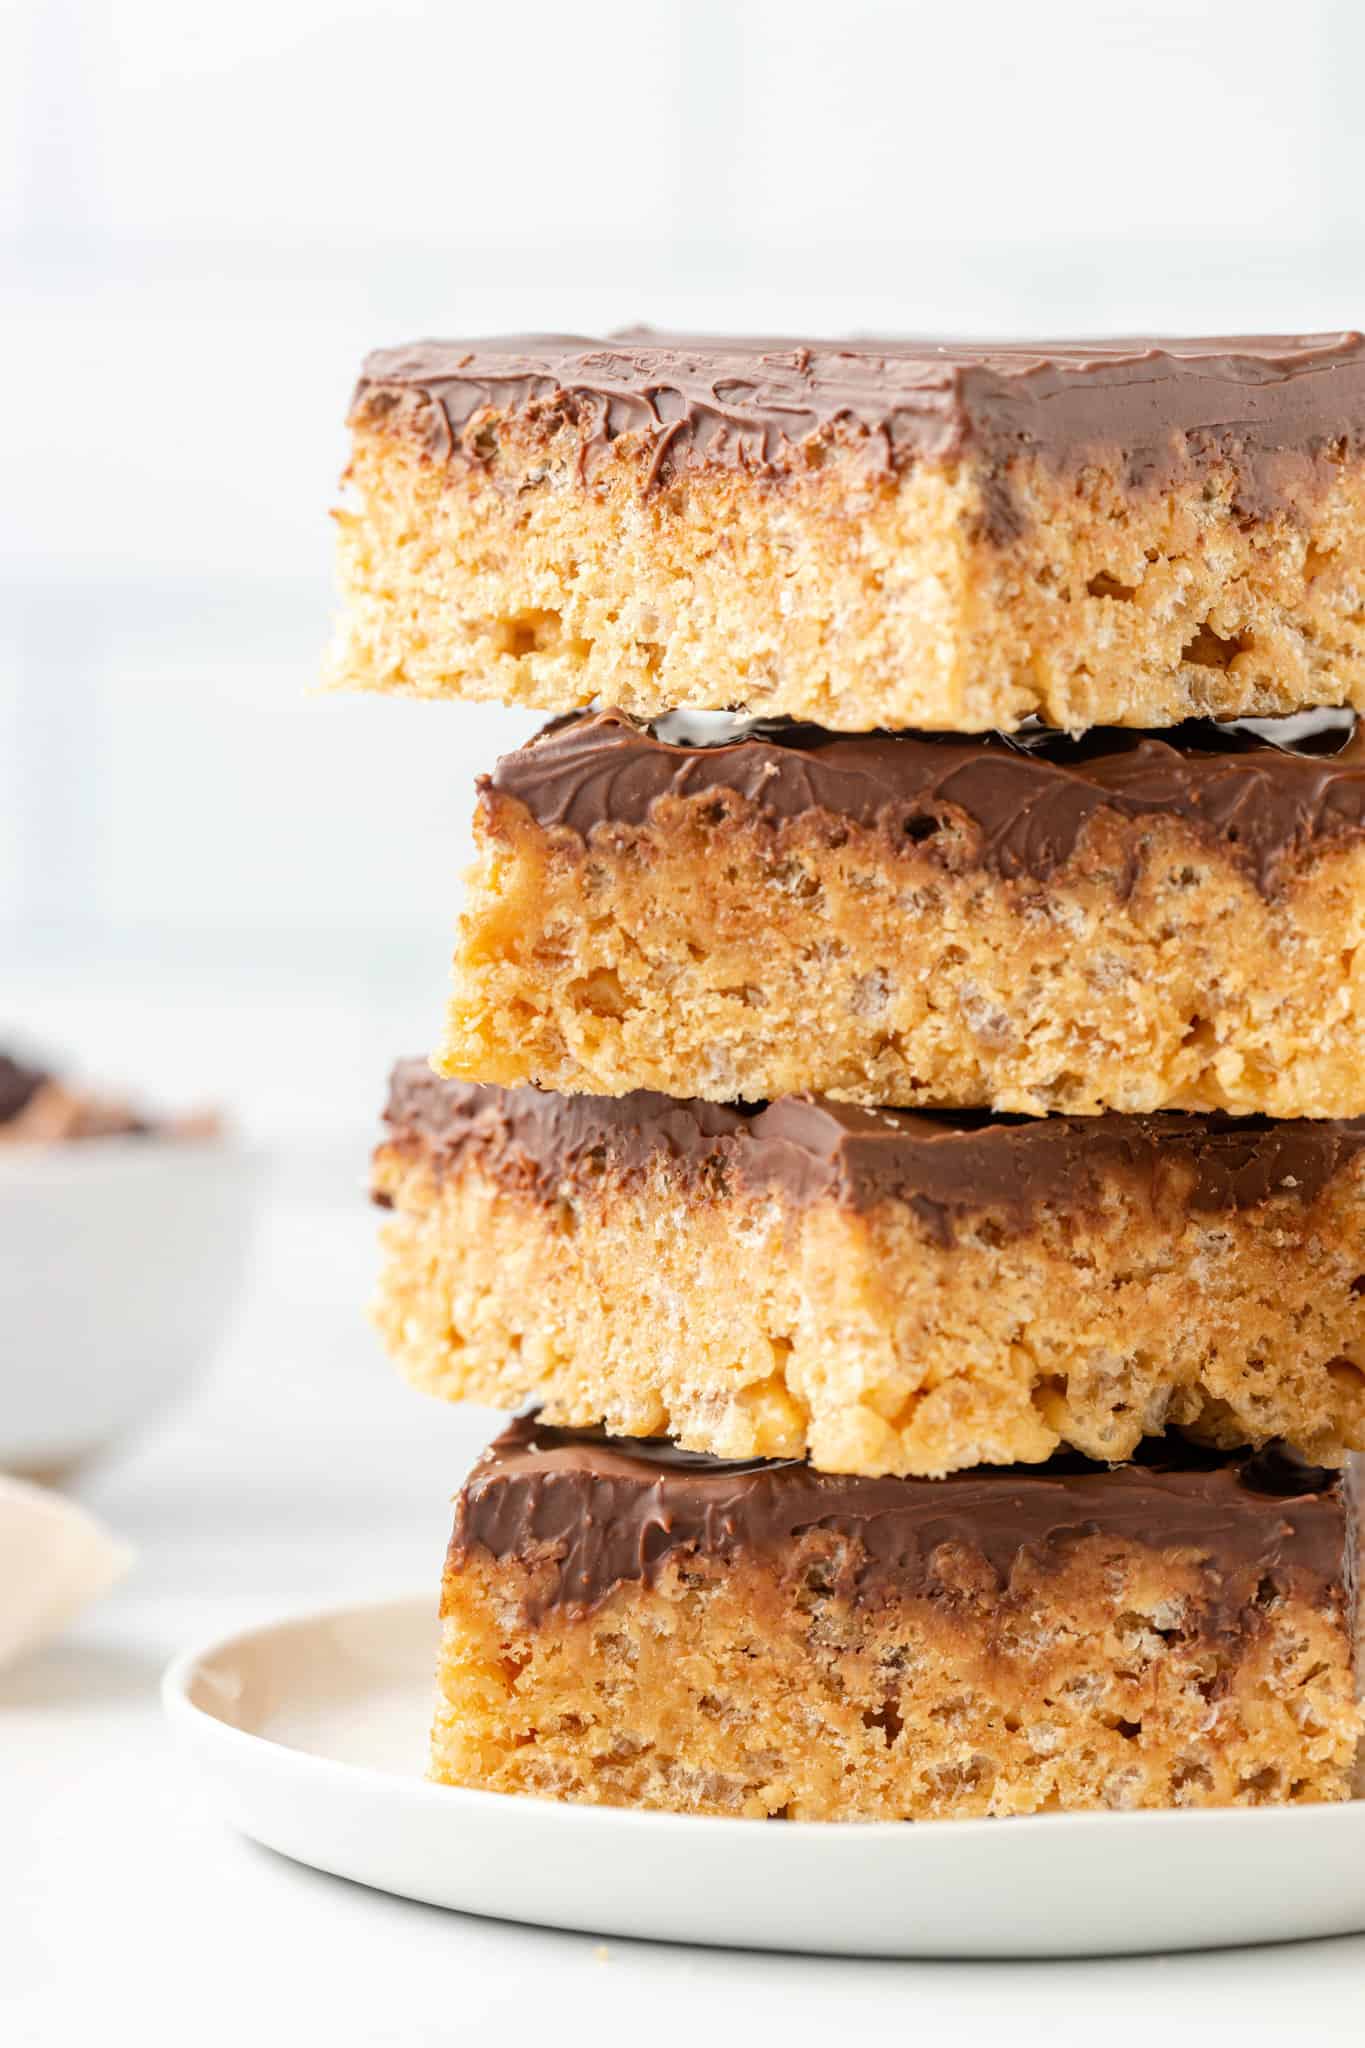 Scotcheroos are delicious peanut butter rice krispie treats topped with a layer of melted butterscotch and chocolate chips.